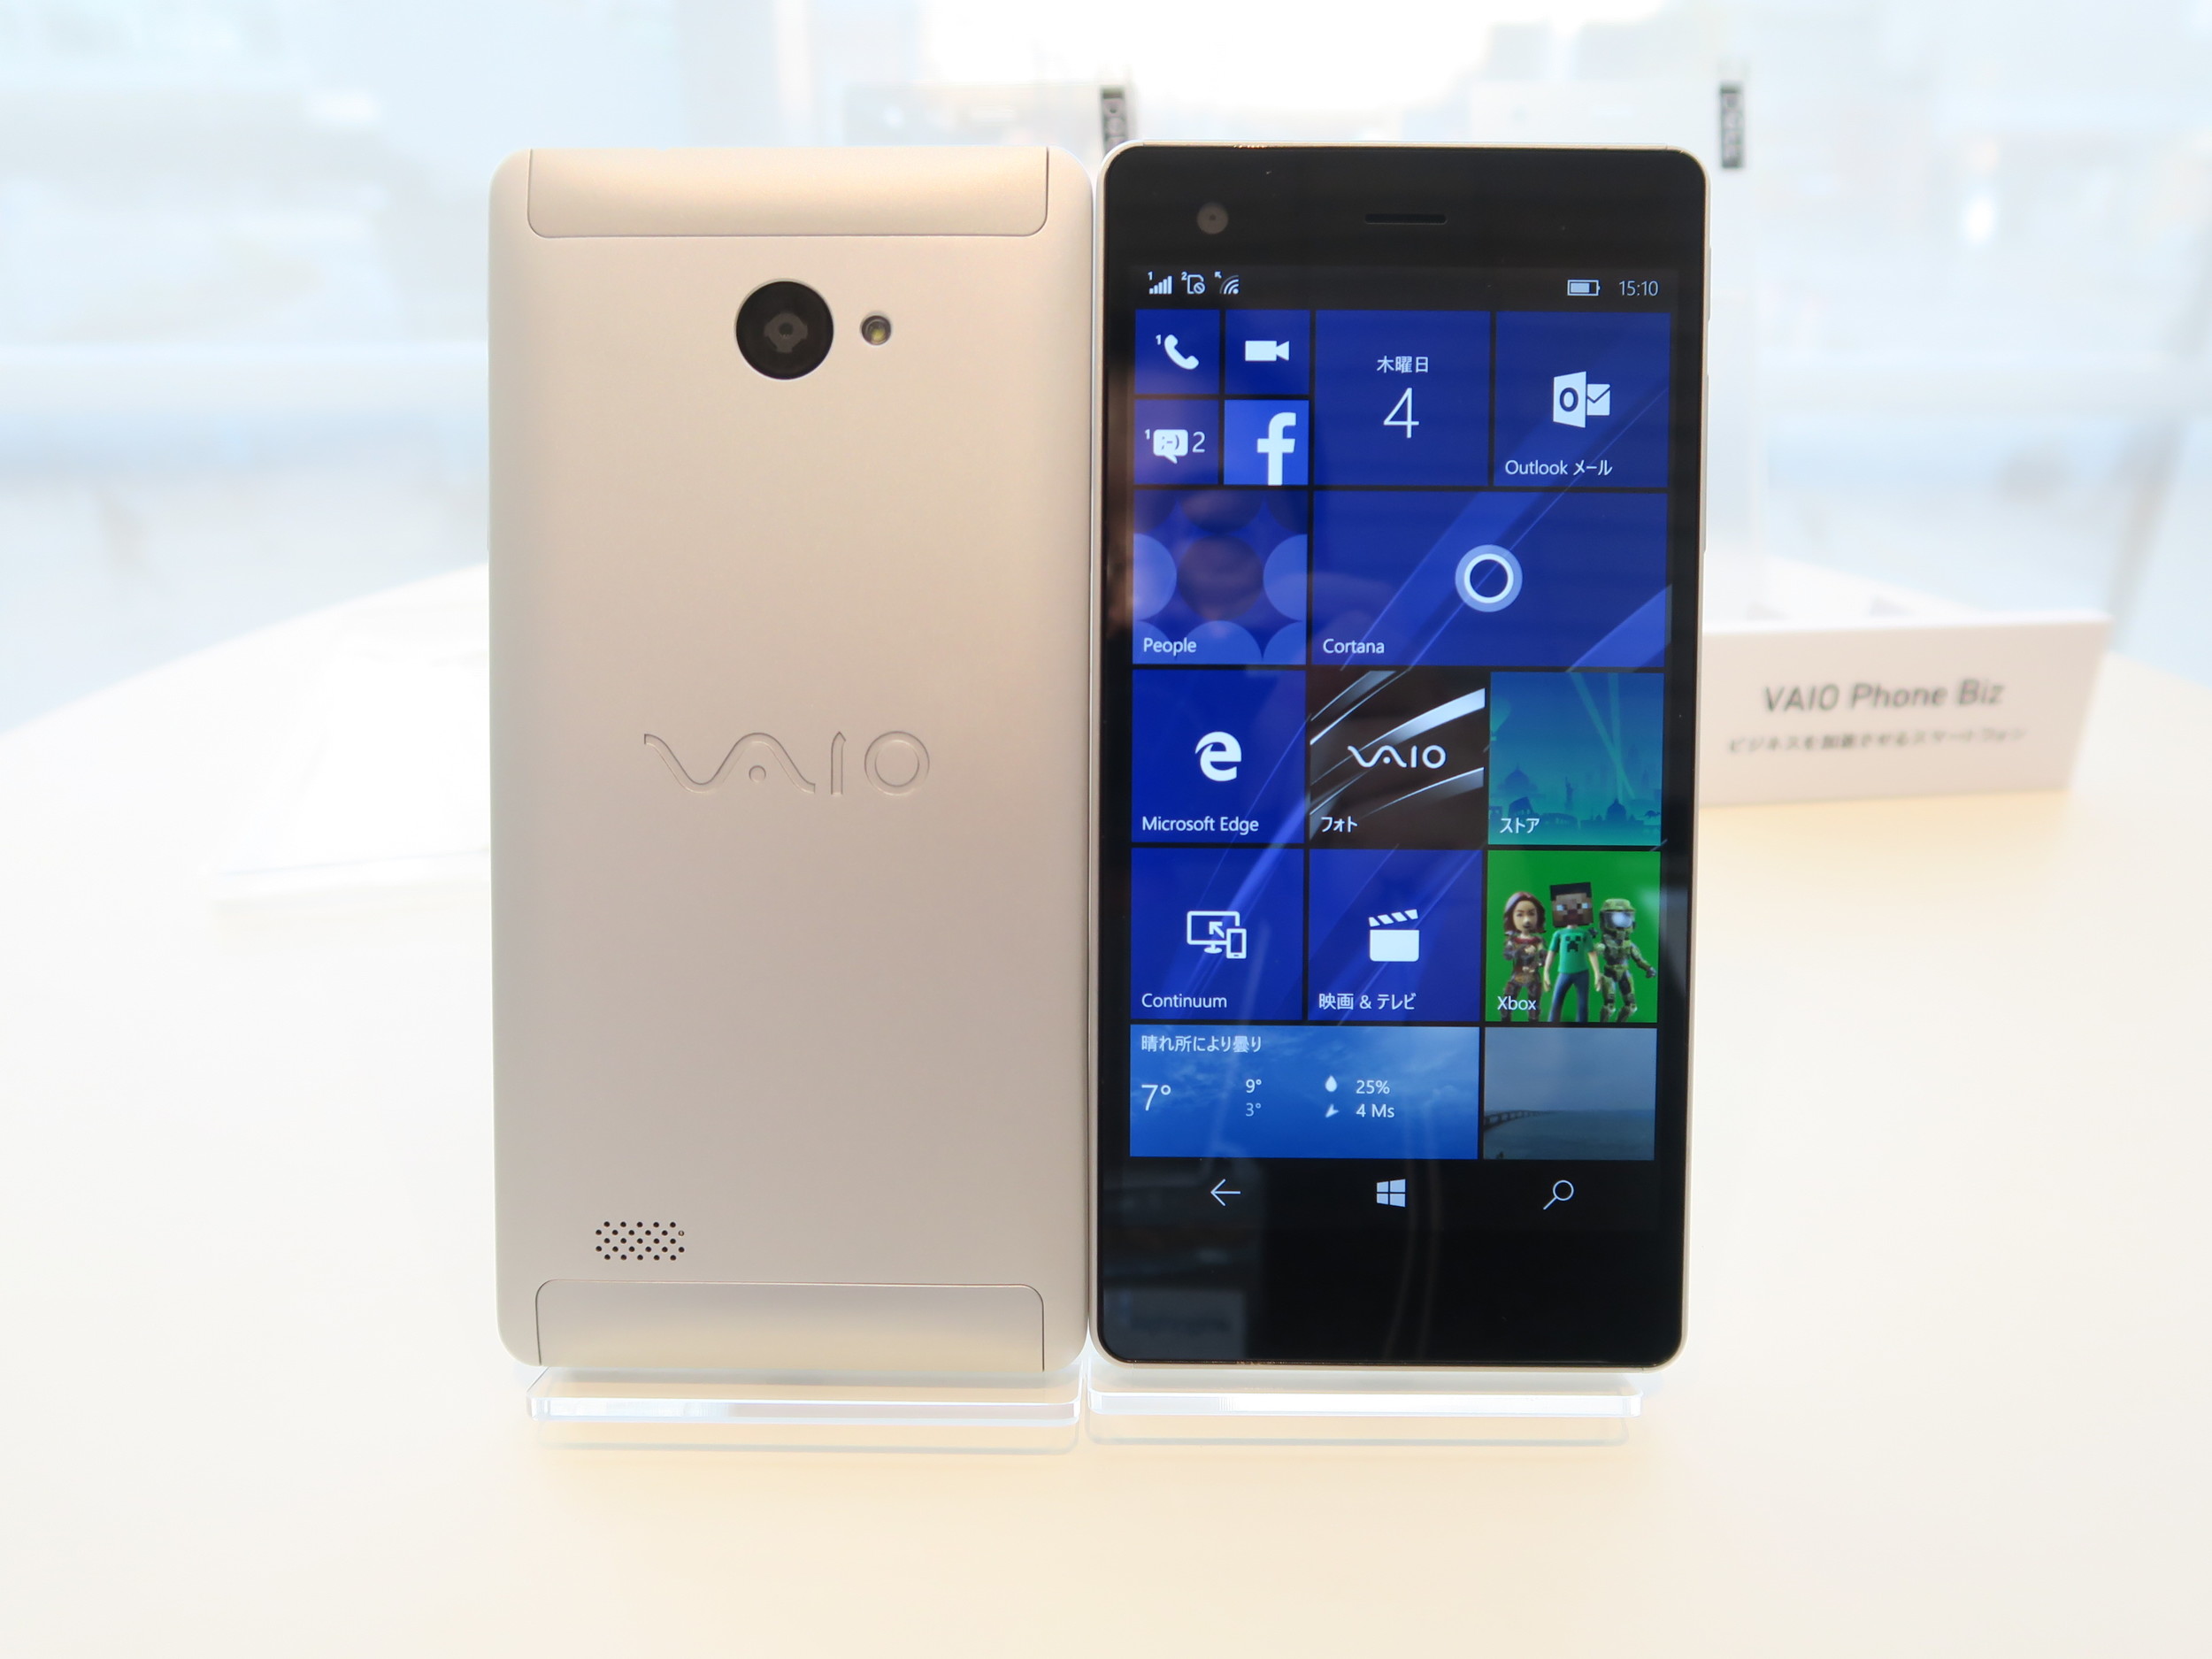 Vaio-Phone-Biz-Windows-10-supported-smartphone-is-all-set-to-be-launchedc-in-April